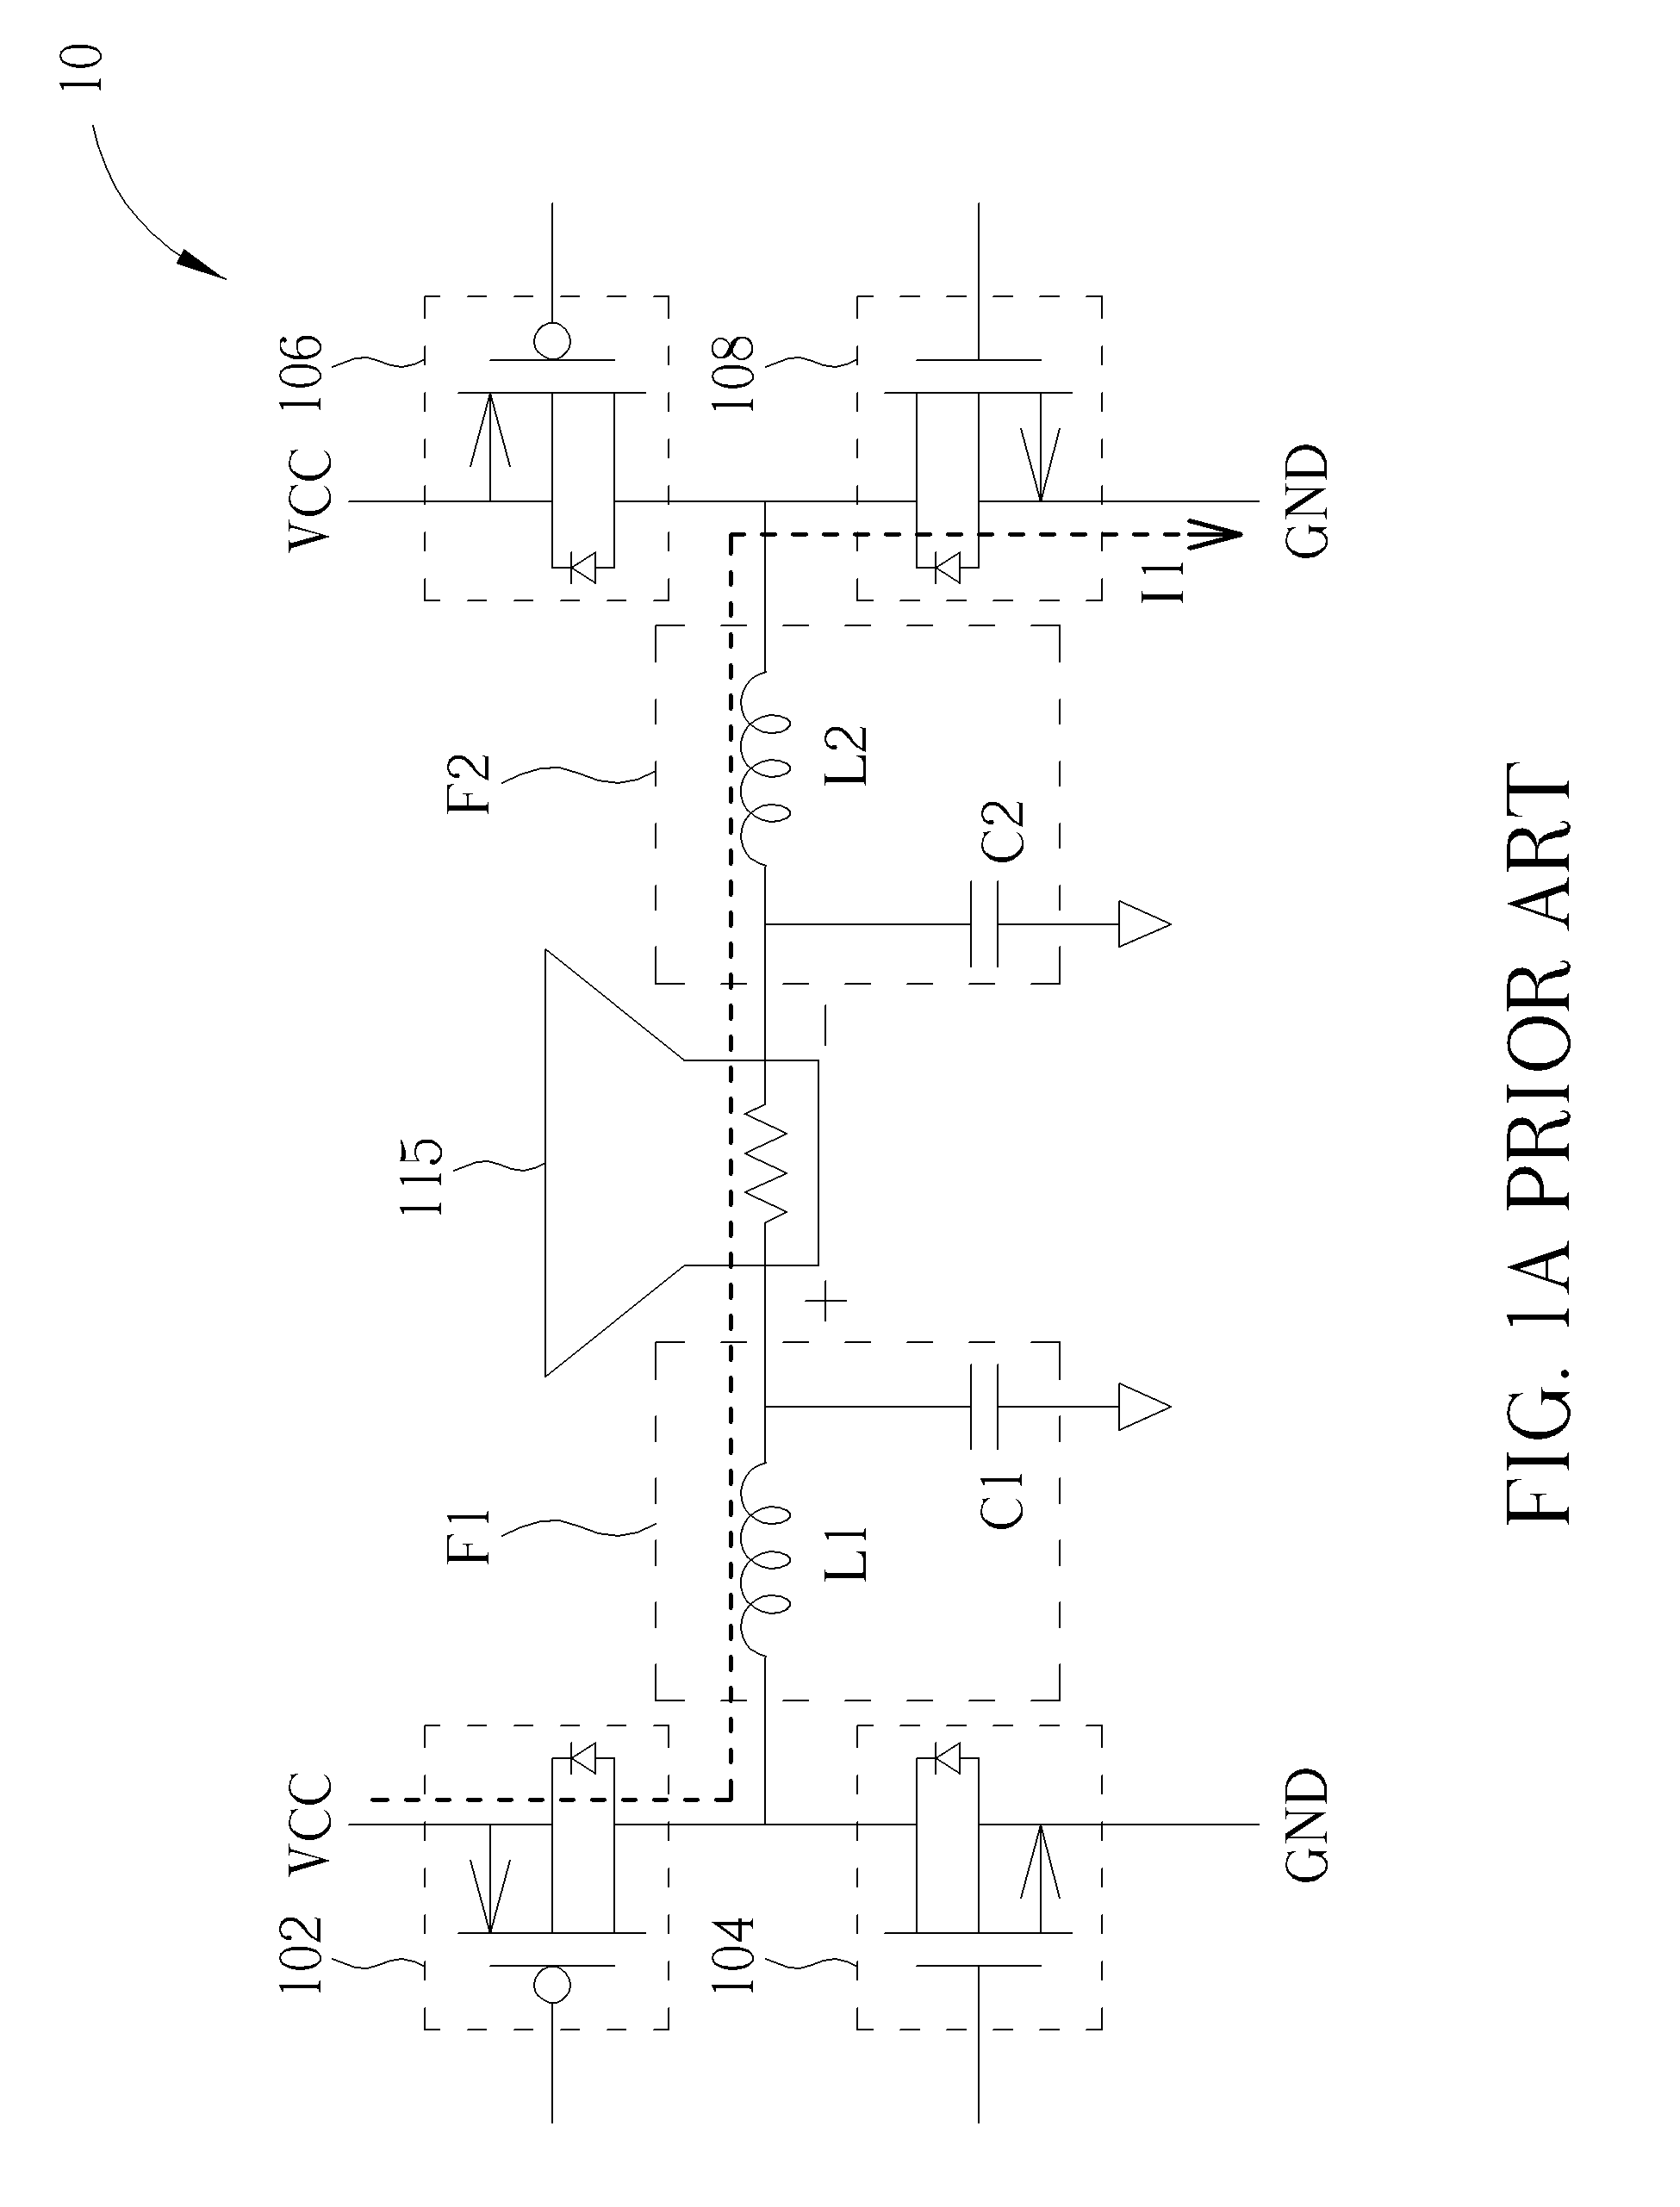 Pop-free single-ended output class-D amplifier